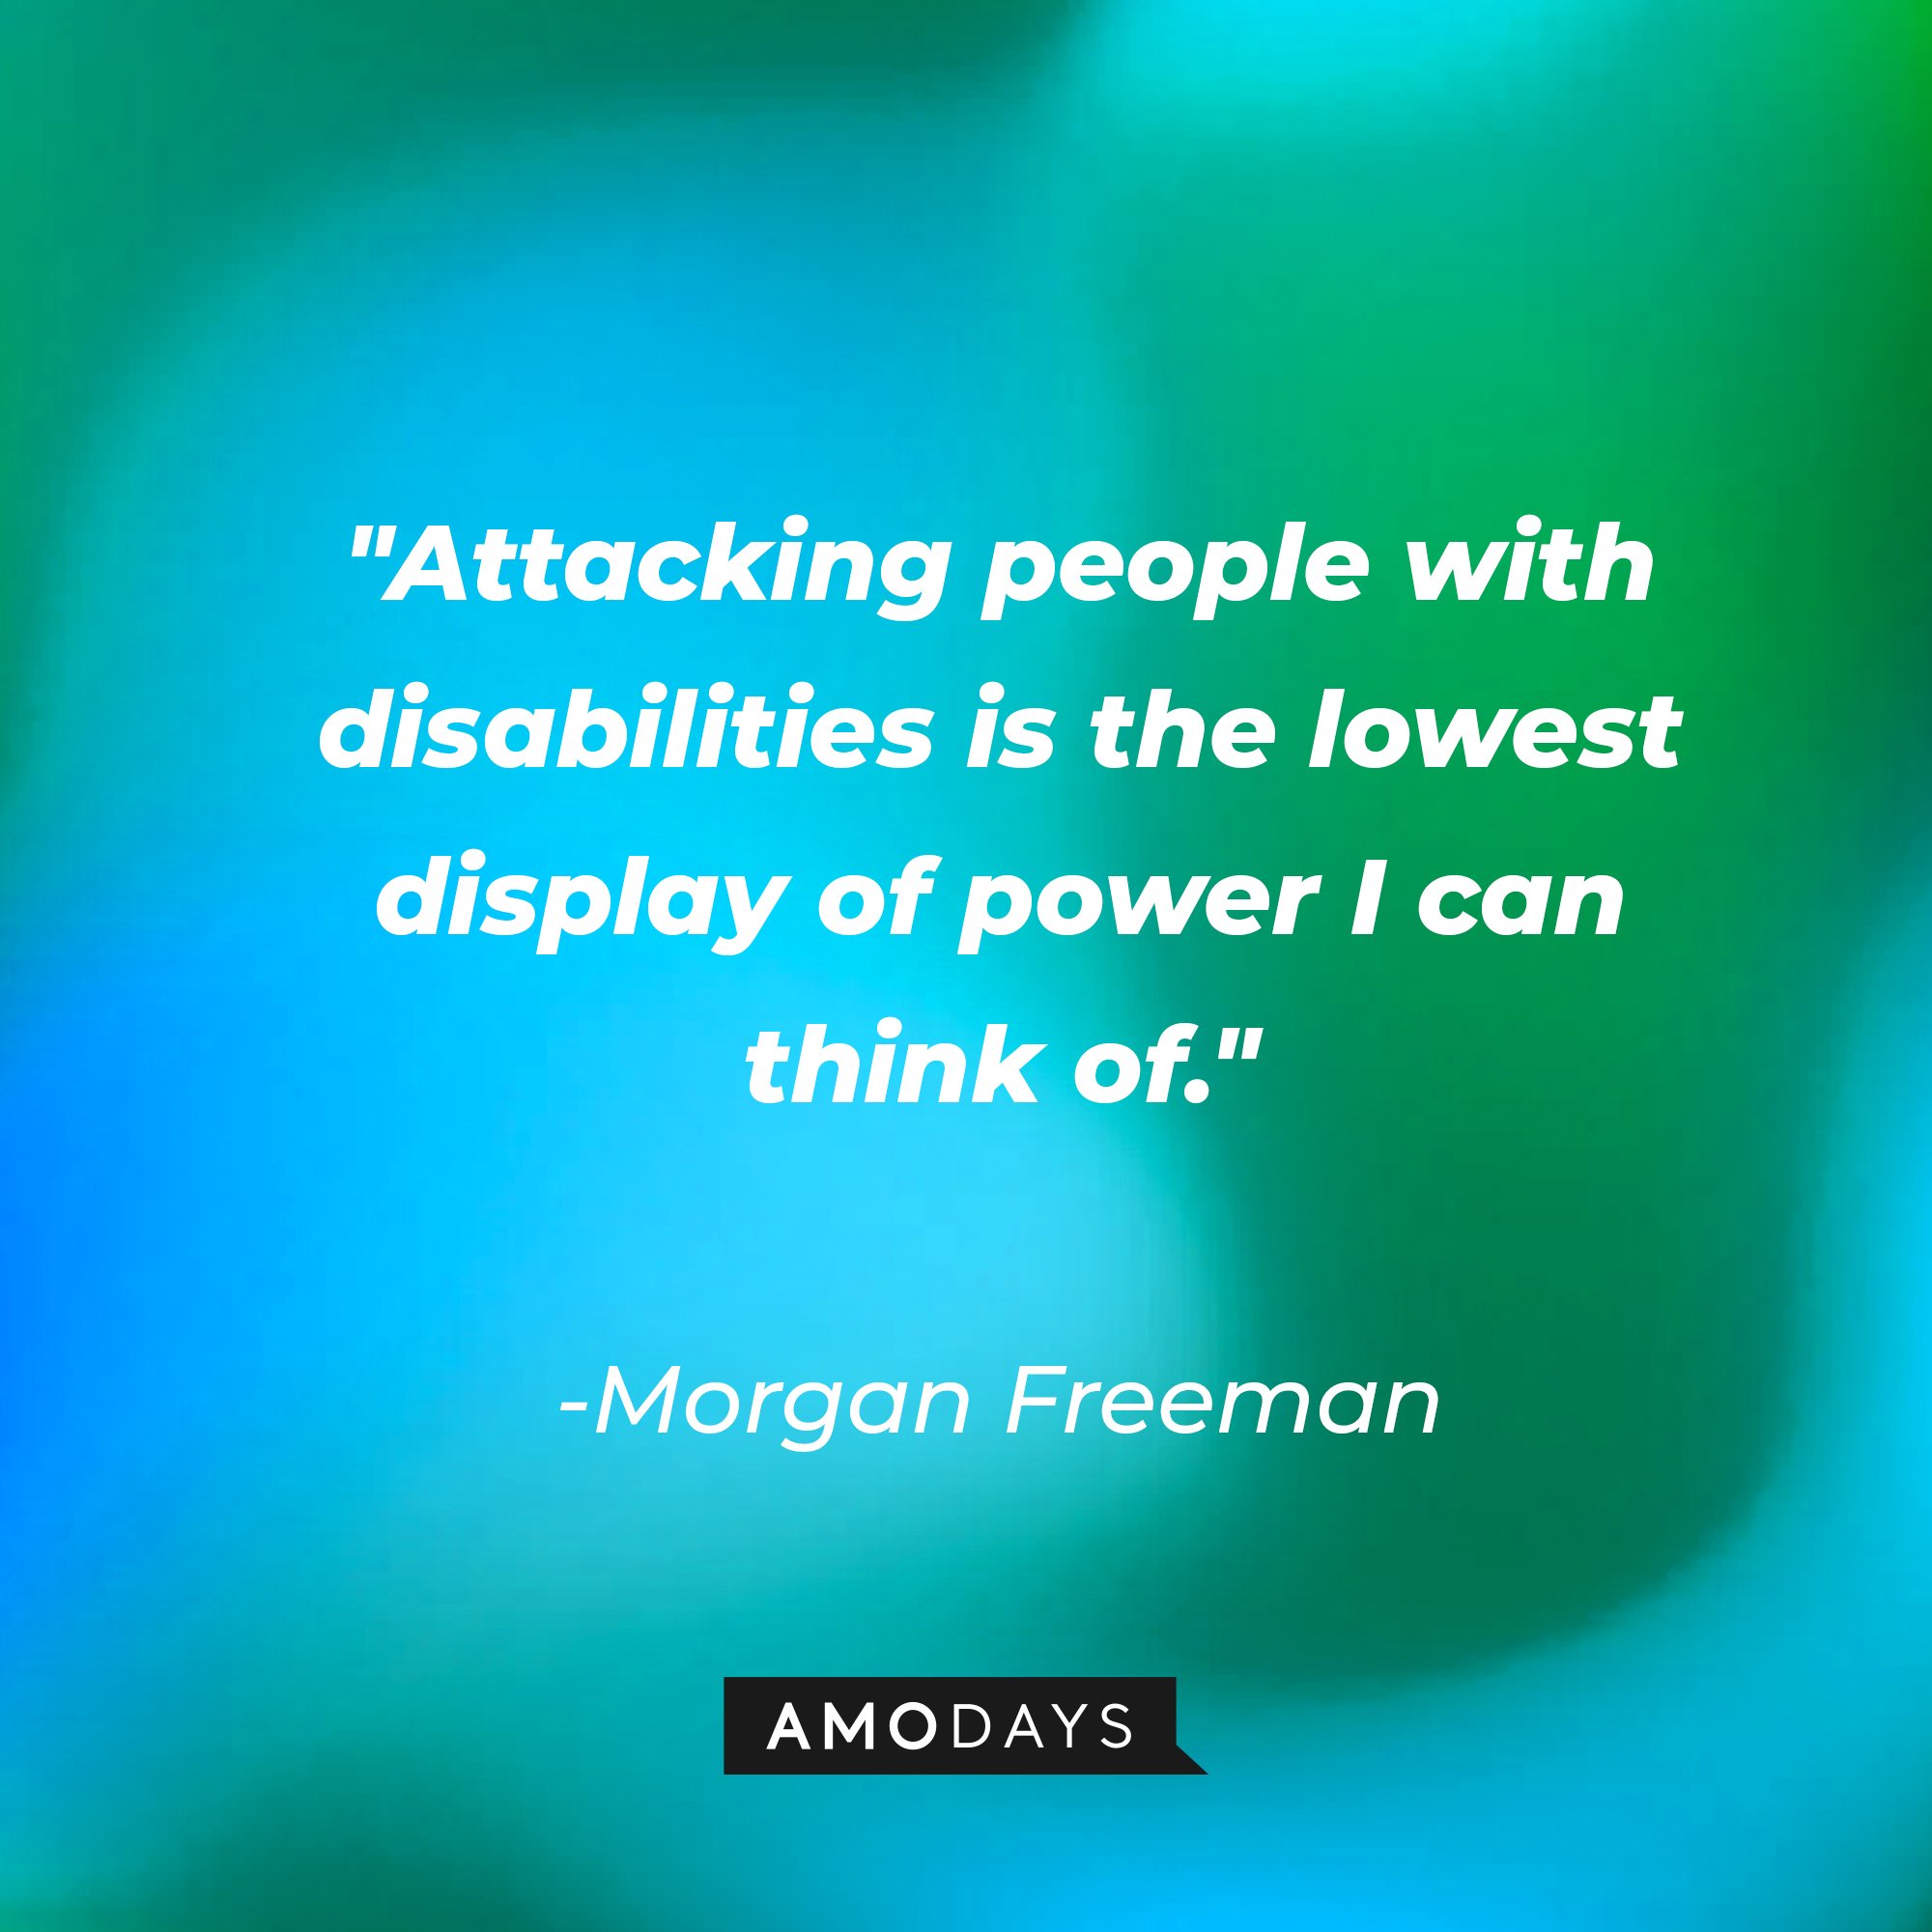   Morgan Freeman’s quote: "Attacking people with disabilities is the lowest display of power I can think of." | Image: AmoDays